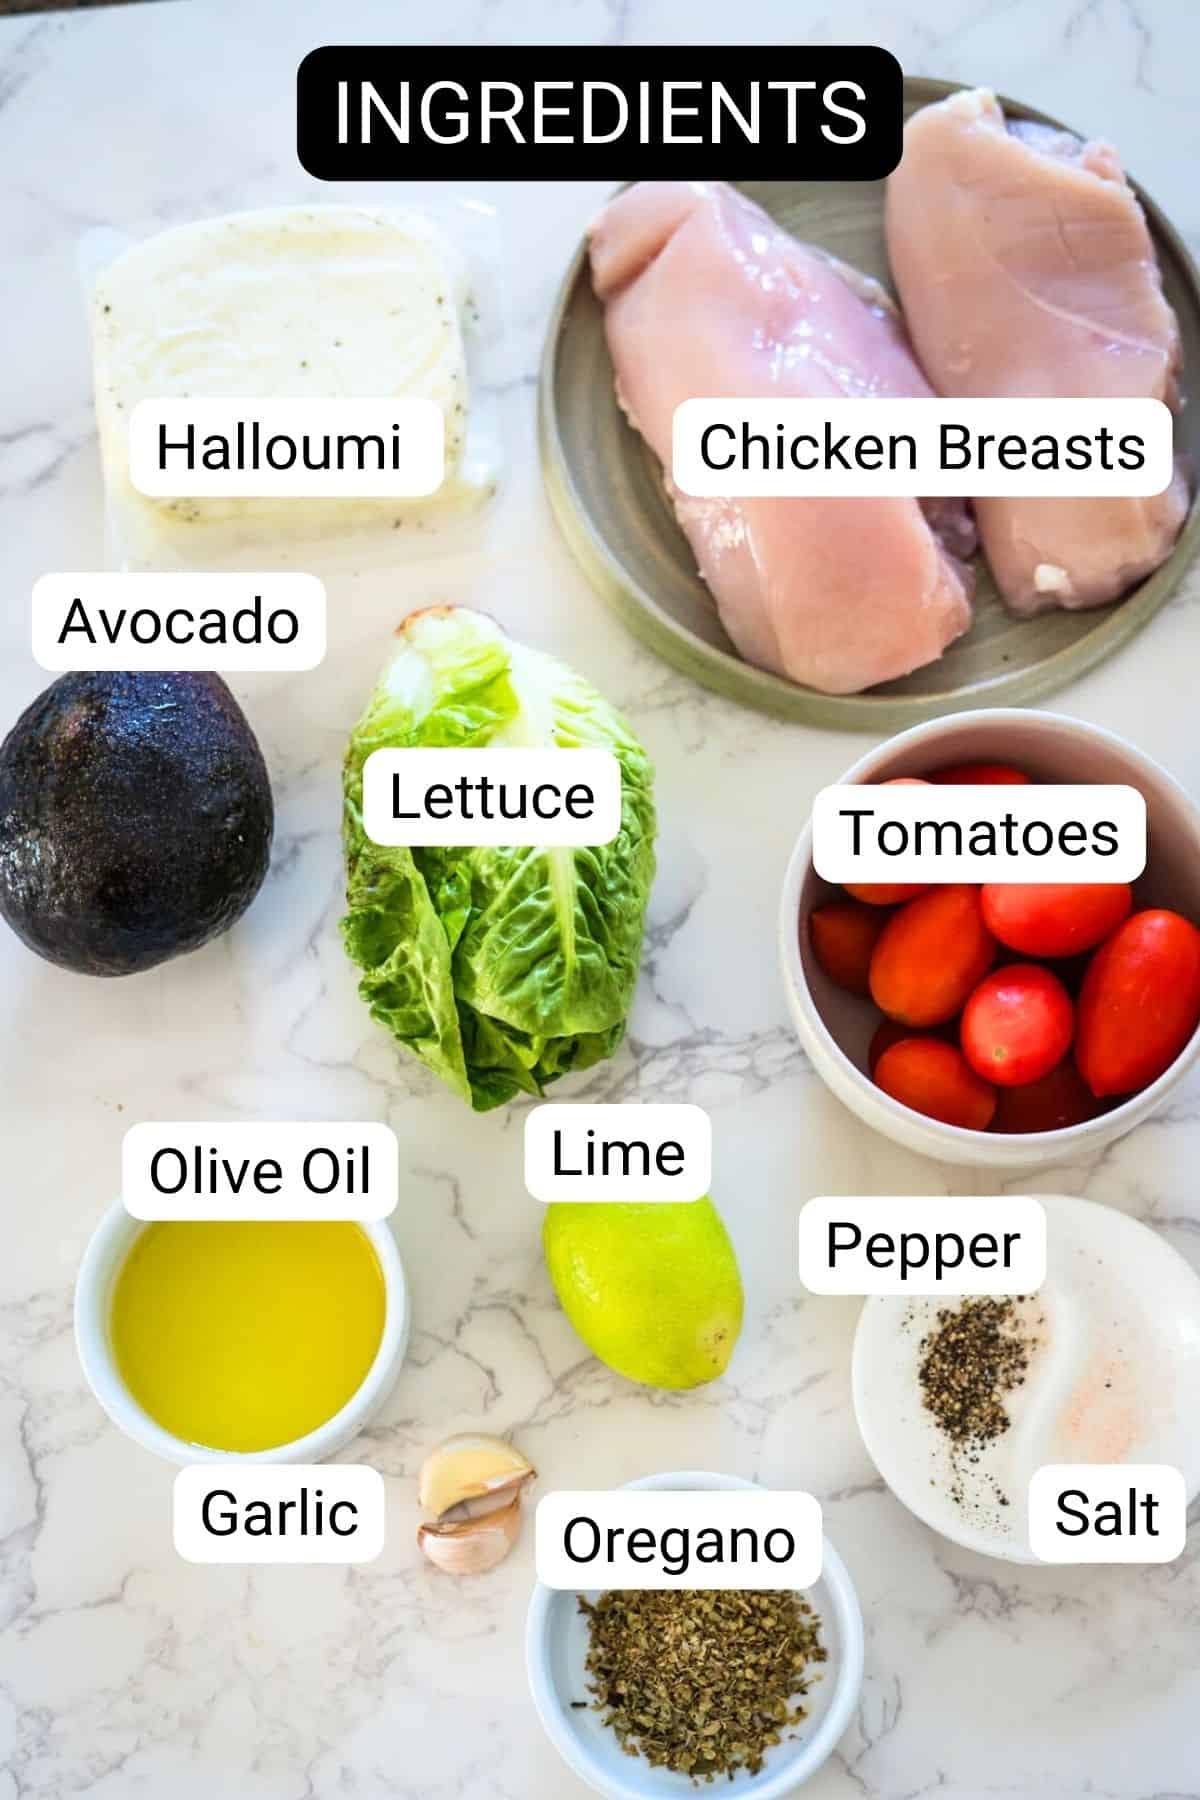 Ingredients for a recipe displayed on a marble countertop, labeled including halloumi, chicken breasts, avocado, lettuce, tomatoes, olive oil, lime, garlic, oregano, pepper, and salt.